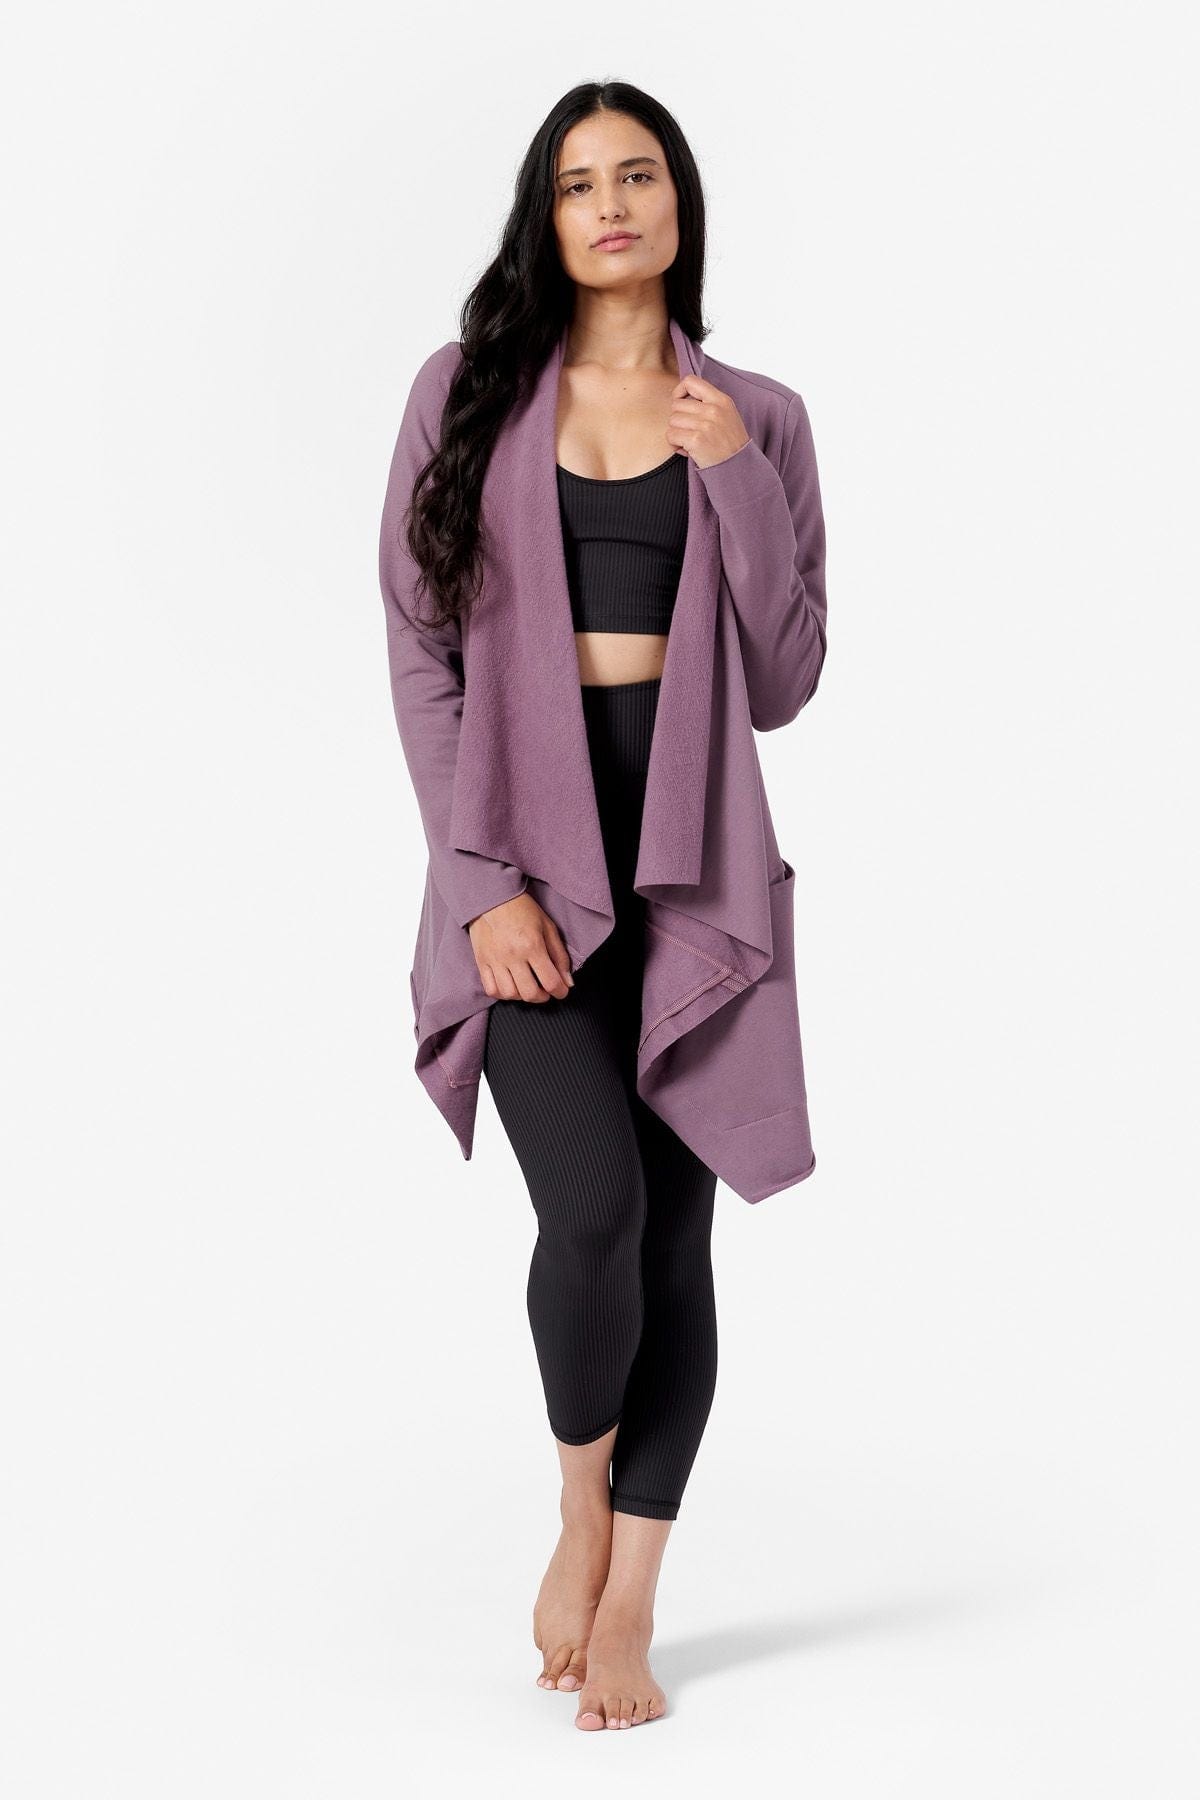 a woman wearing a purple draped jacket made from fleece and a black ribbed crop top and leggings